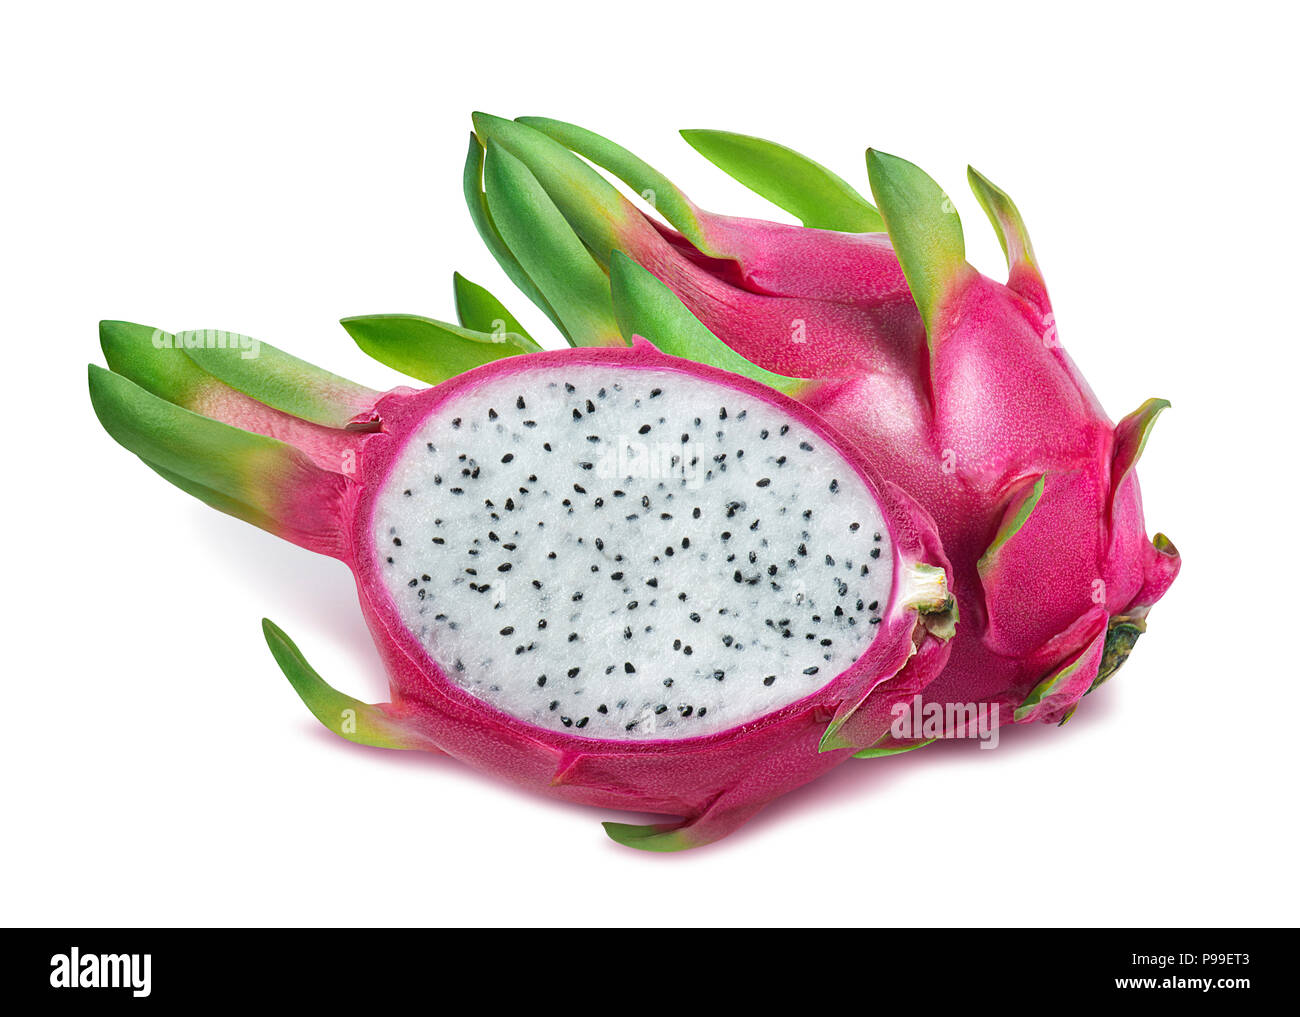 Dragon fruit or pitaya horizontal composition isolated on white background as package design element Stock Photo